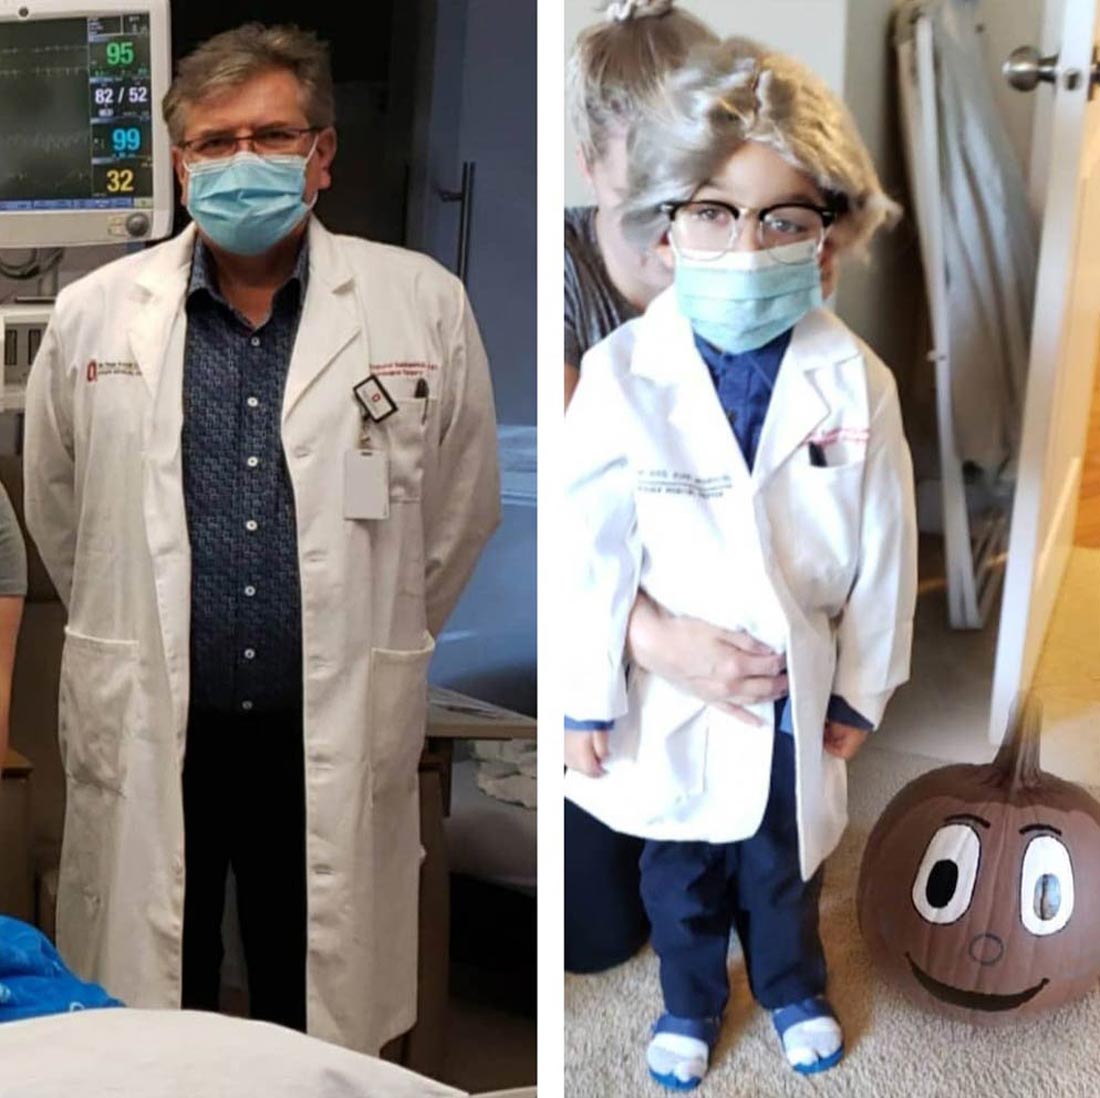 Dr. Bankiewicz and child patient JuJu Halloween costume